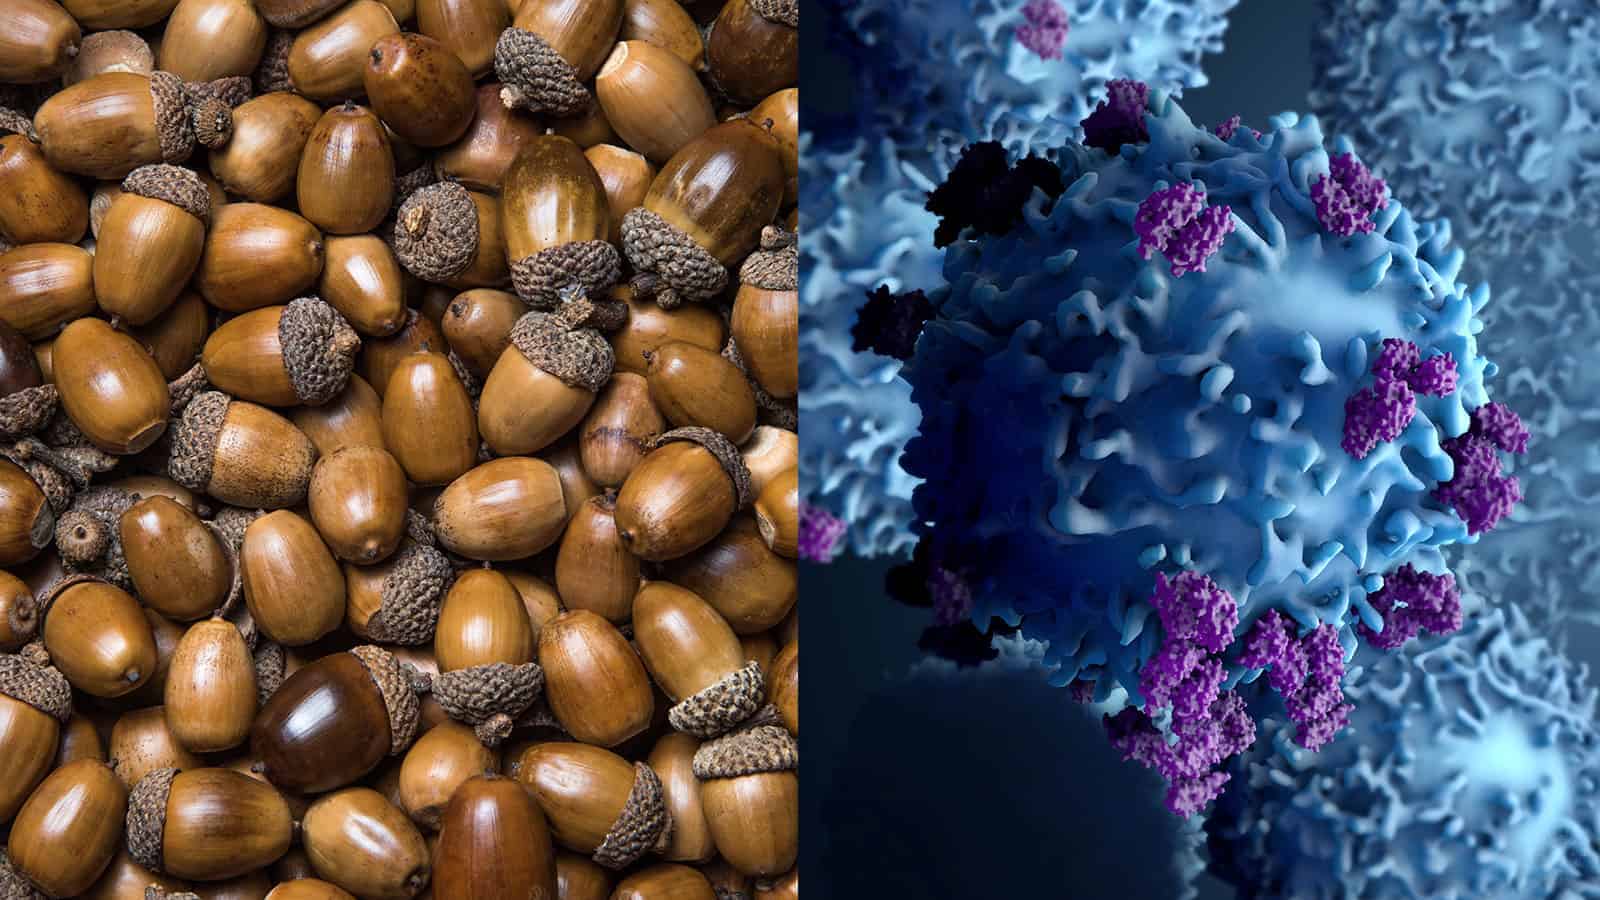 Can Acorns Can Fight Cancer? Researchers Reveal How